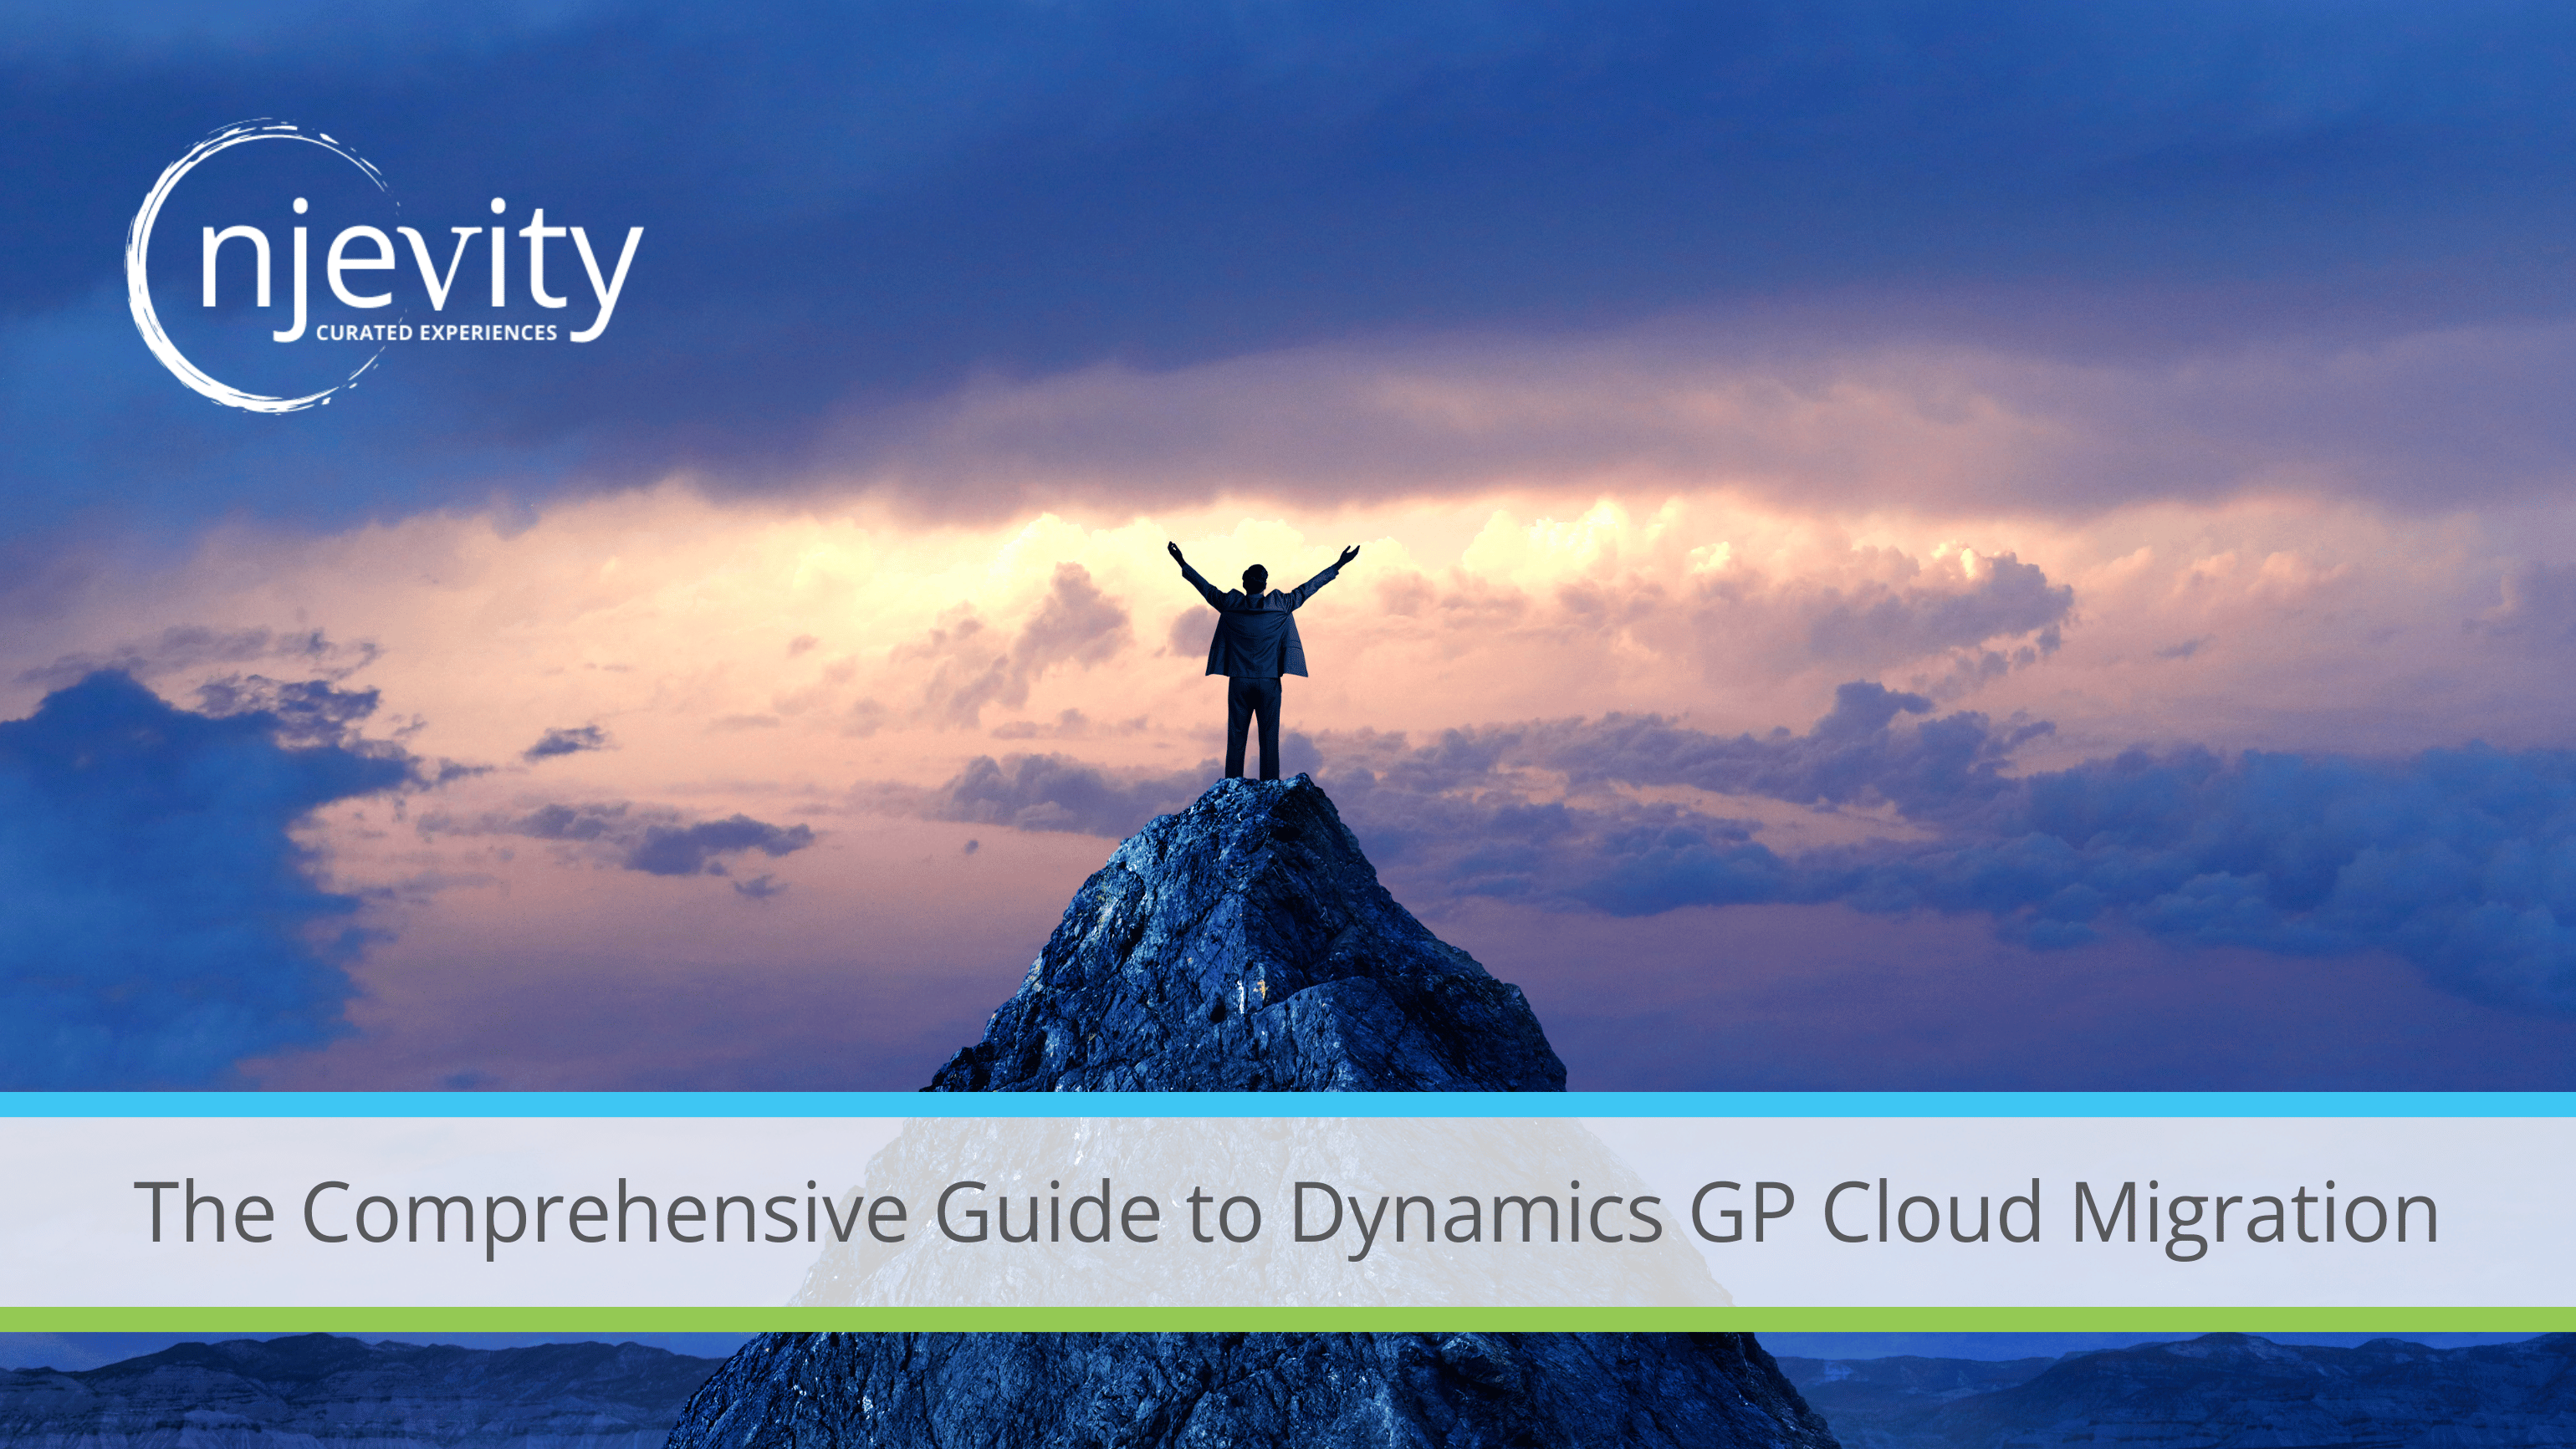 The Comprehensive Guide to Dynamics GP Cloud Migration